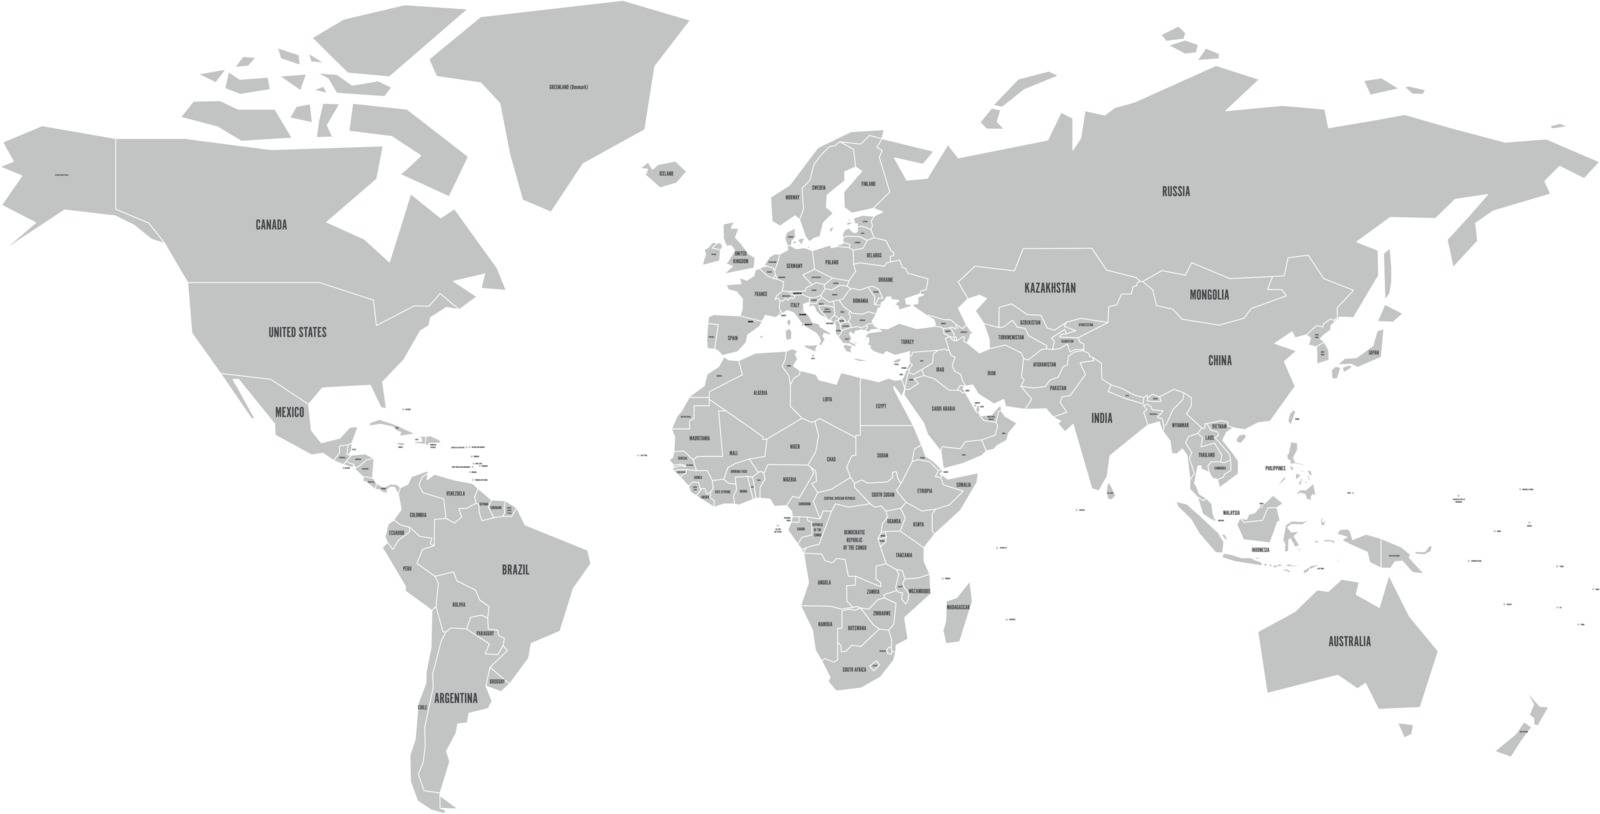 Simplified map of World in grey with country name labeling. Schematic vector map with small states or ministates.